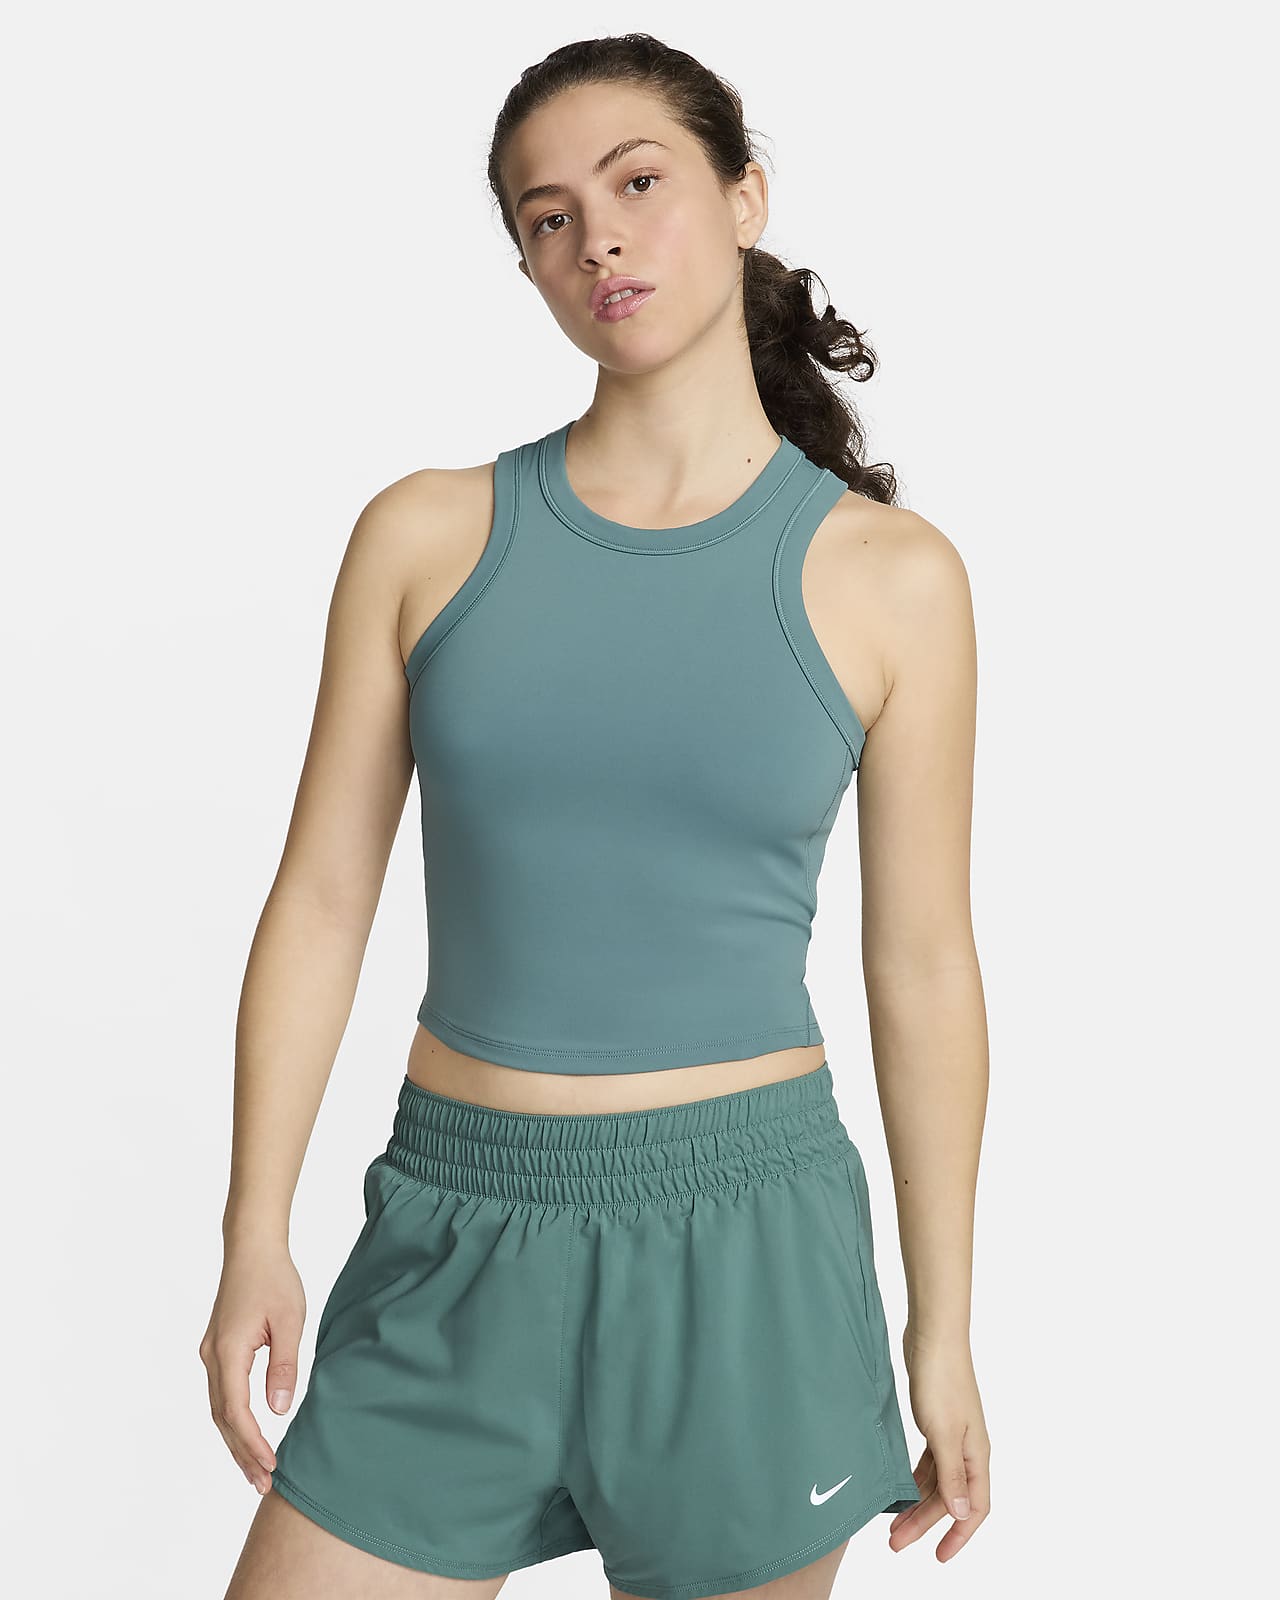 Nike One Fitted Women's Dri-FIT Cropped Tank Top.